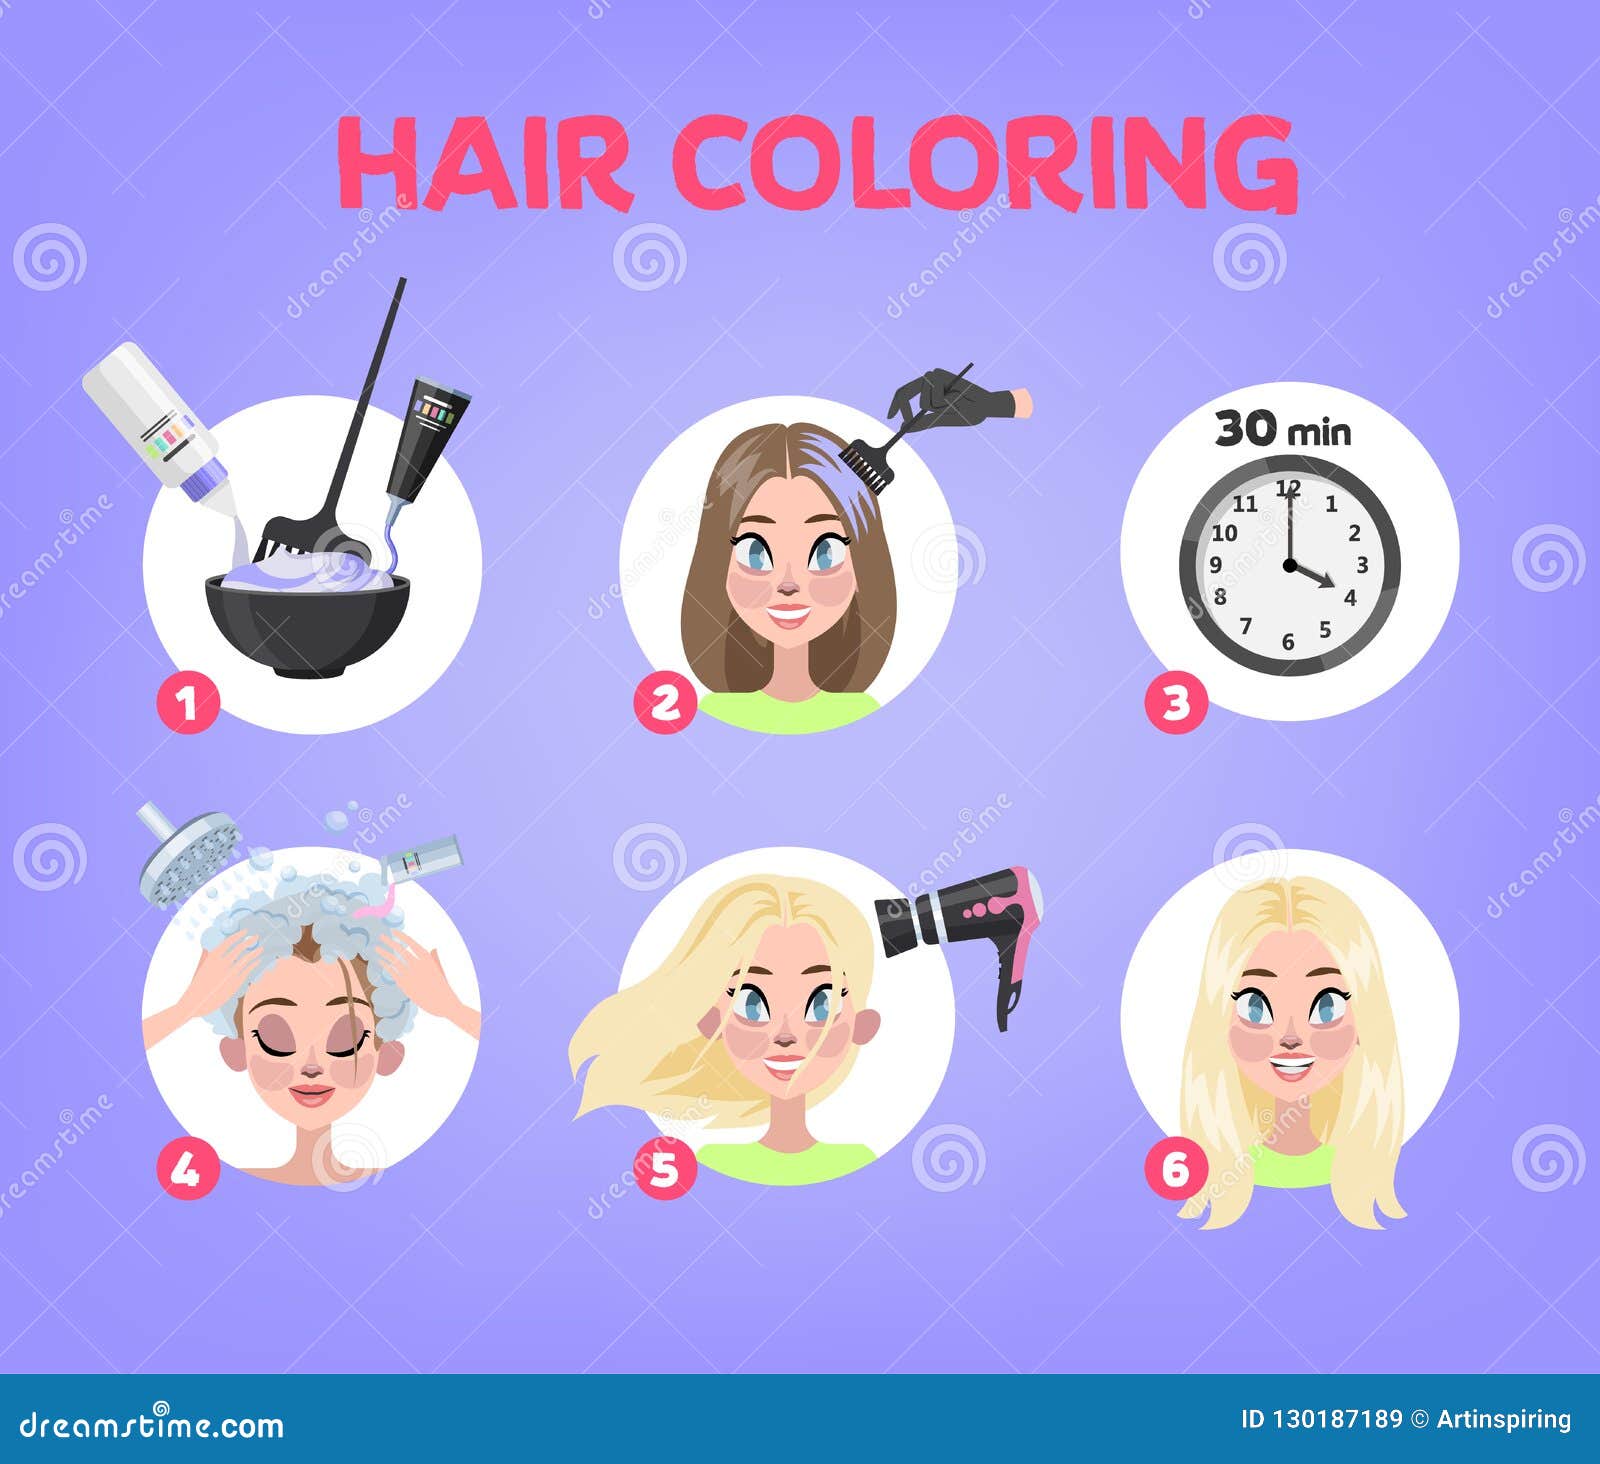 How To Dye Your Hair At Home Stock Vector Illustration Of